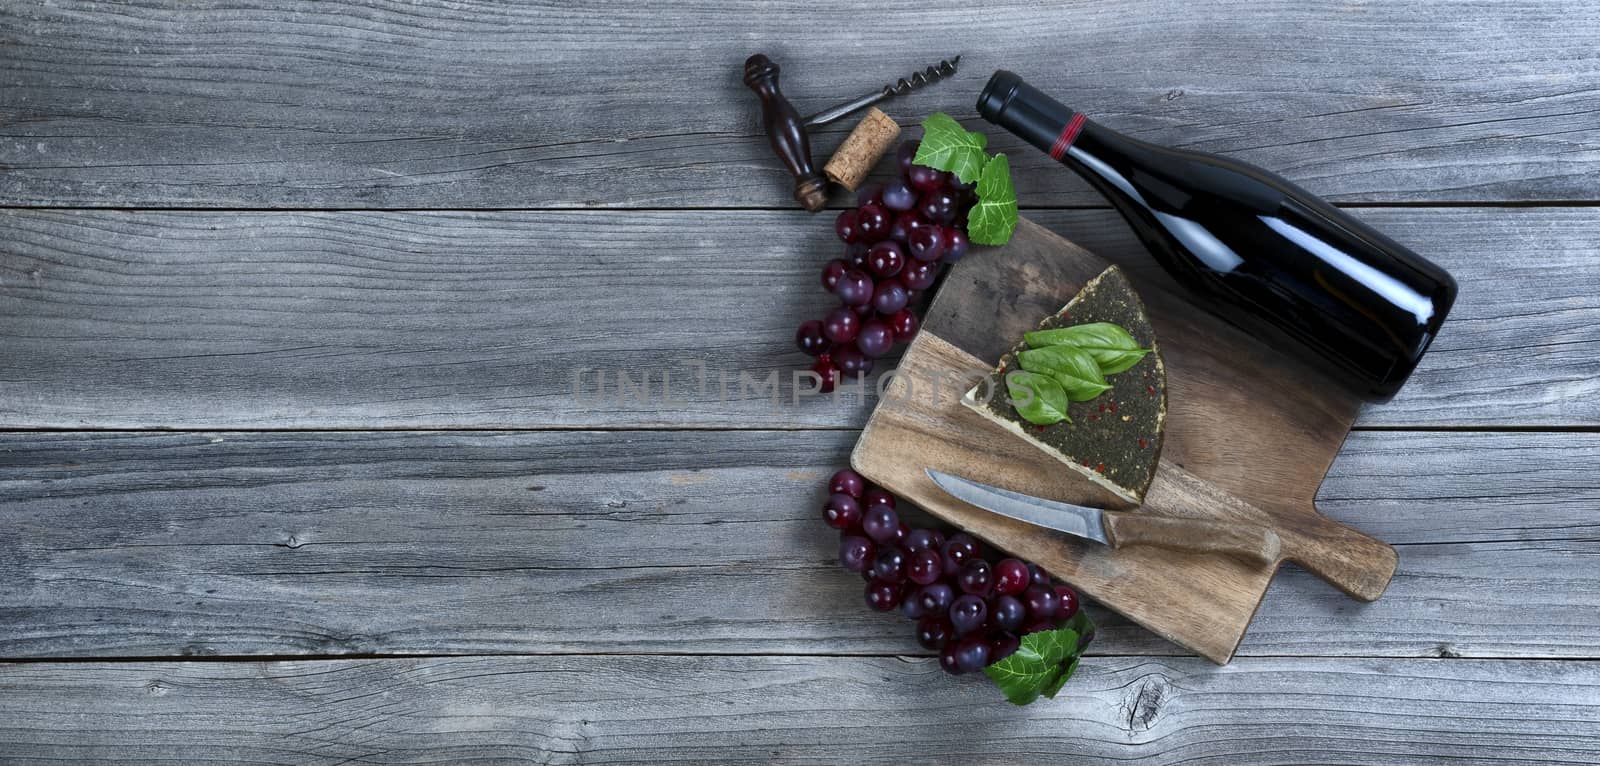 Cheese wedge with a bottle of red wine plus basil leaves and gra by tab1962